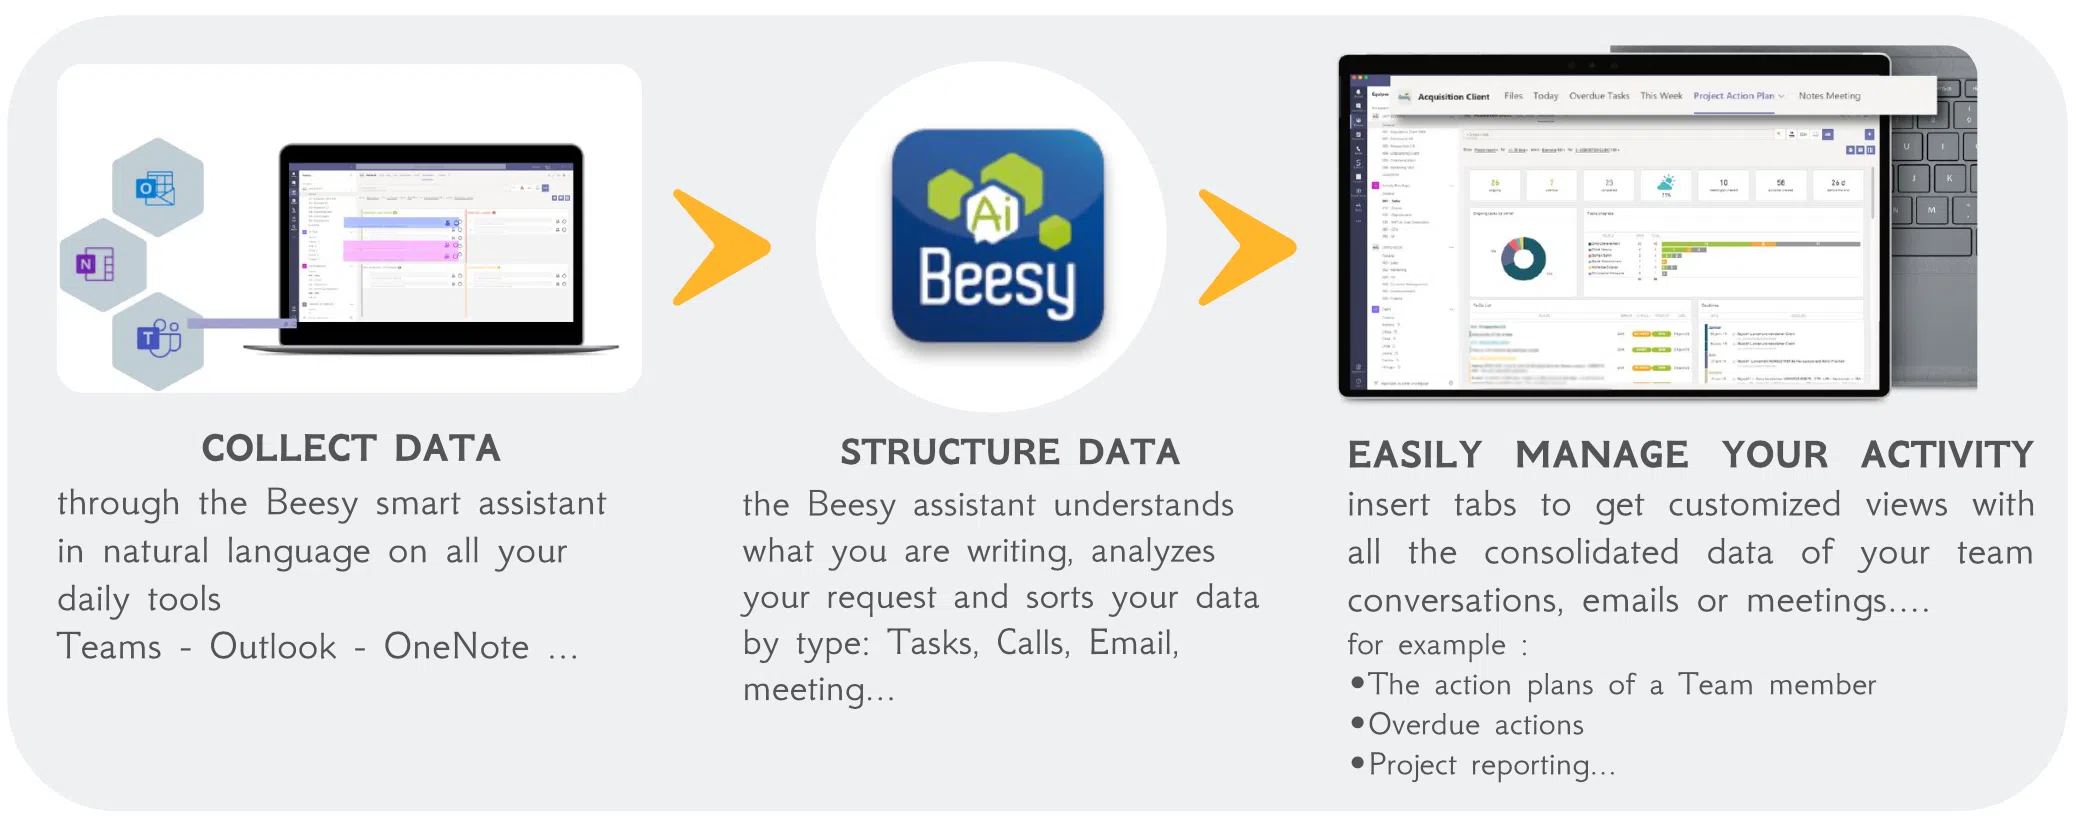 How work the Beesy Smart assistant